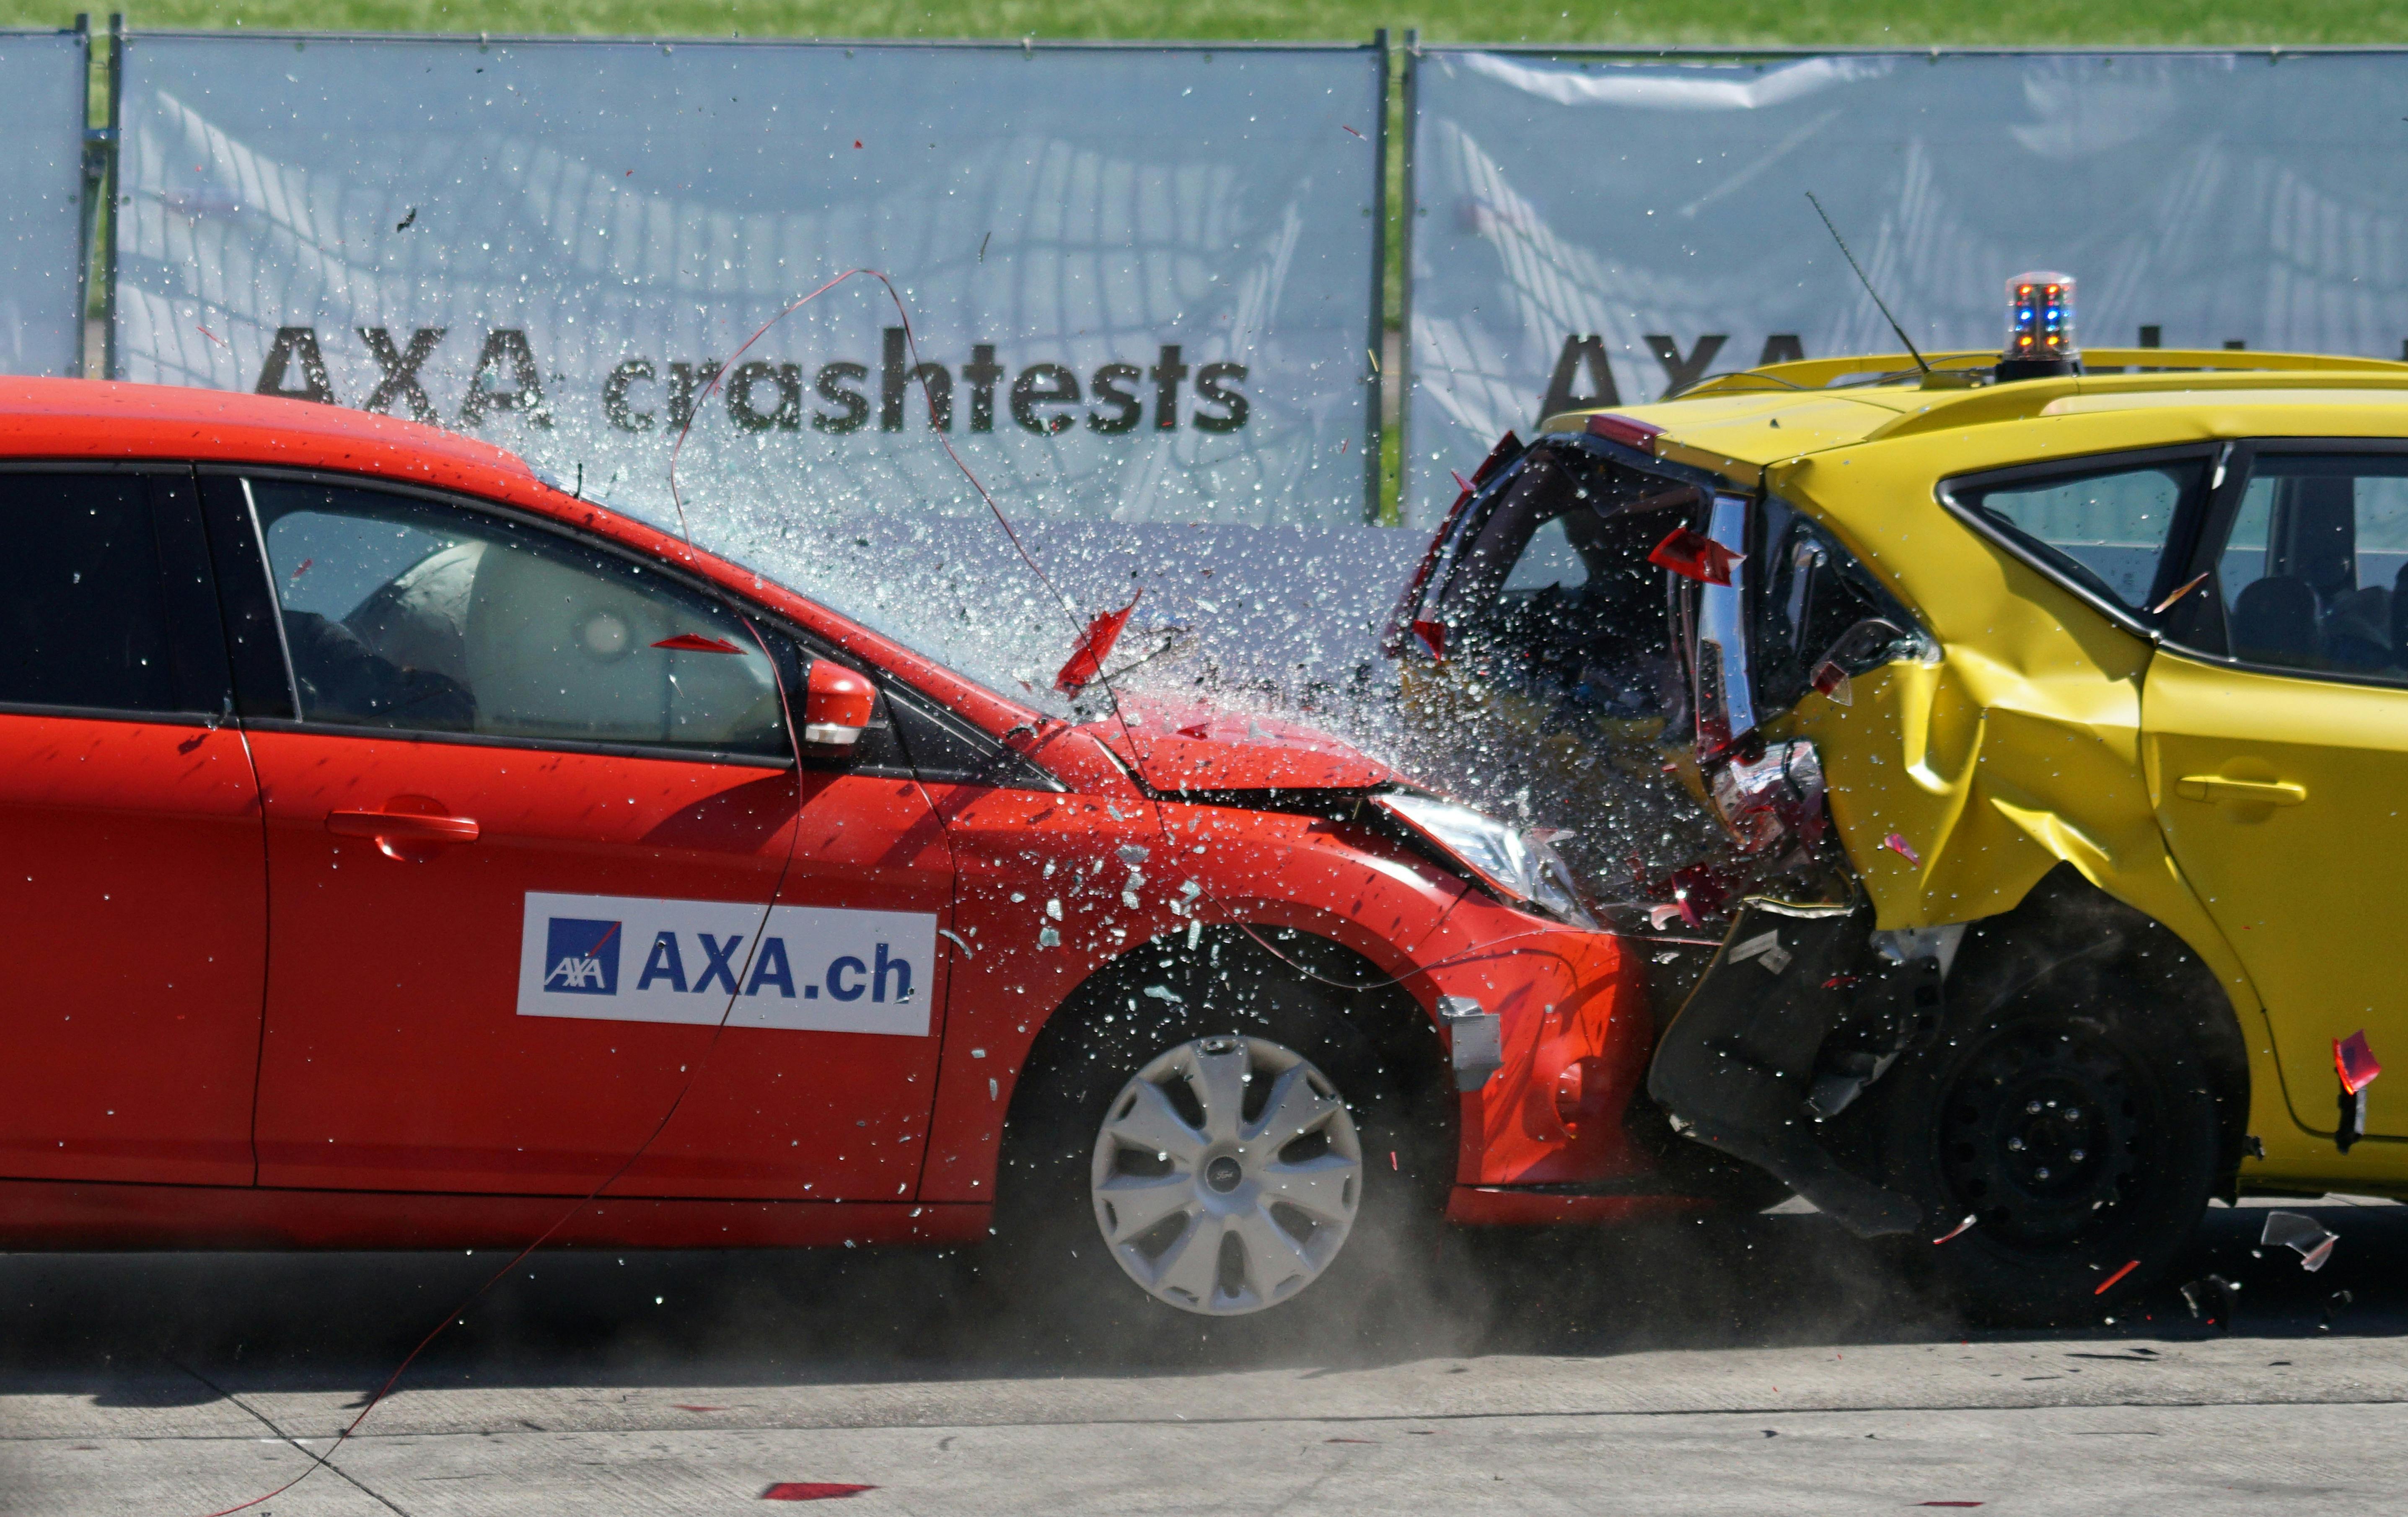 The red car collides with the yellow one, prompting the airbag impact sensor.